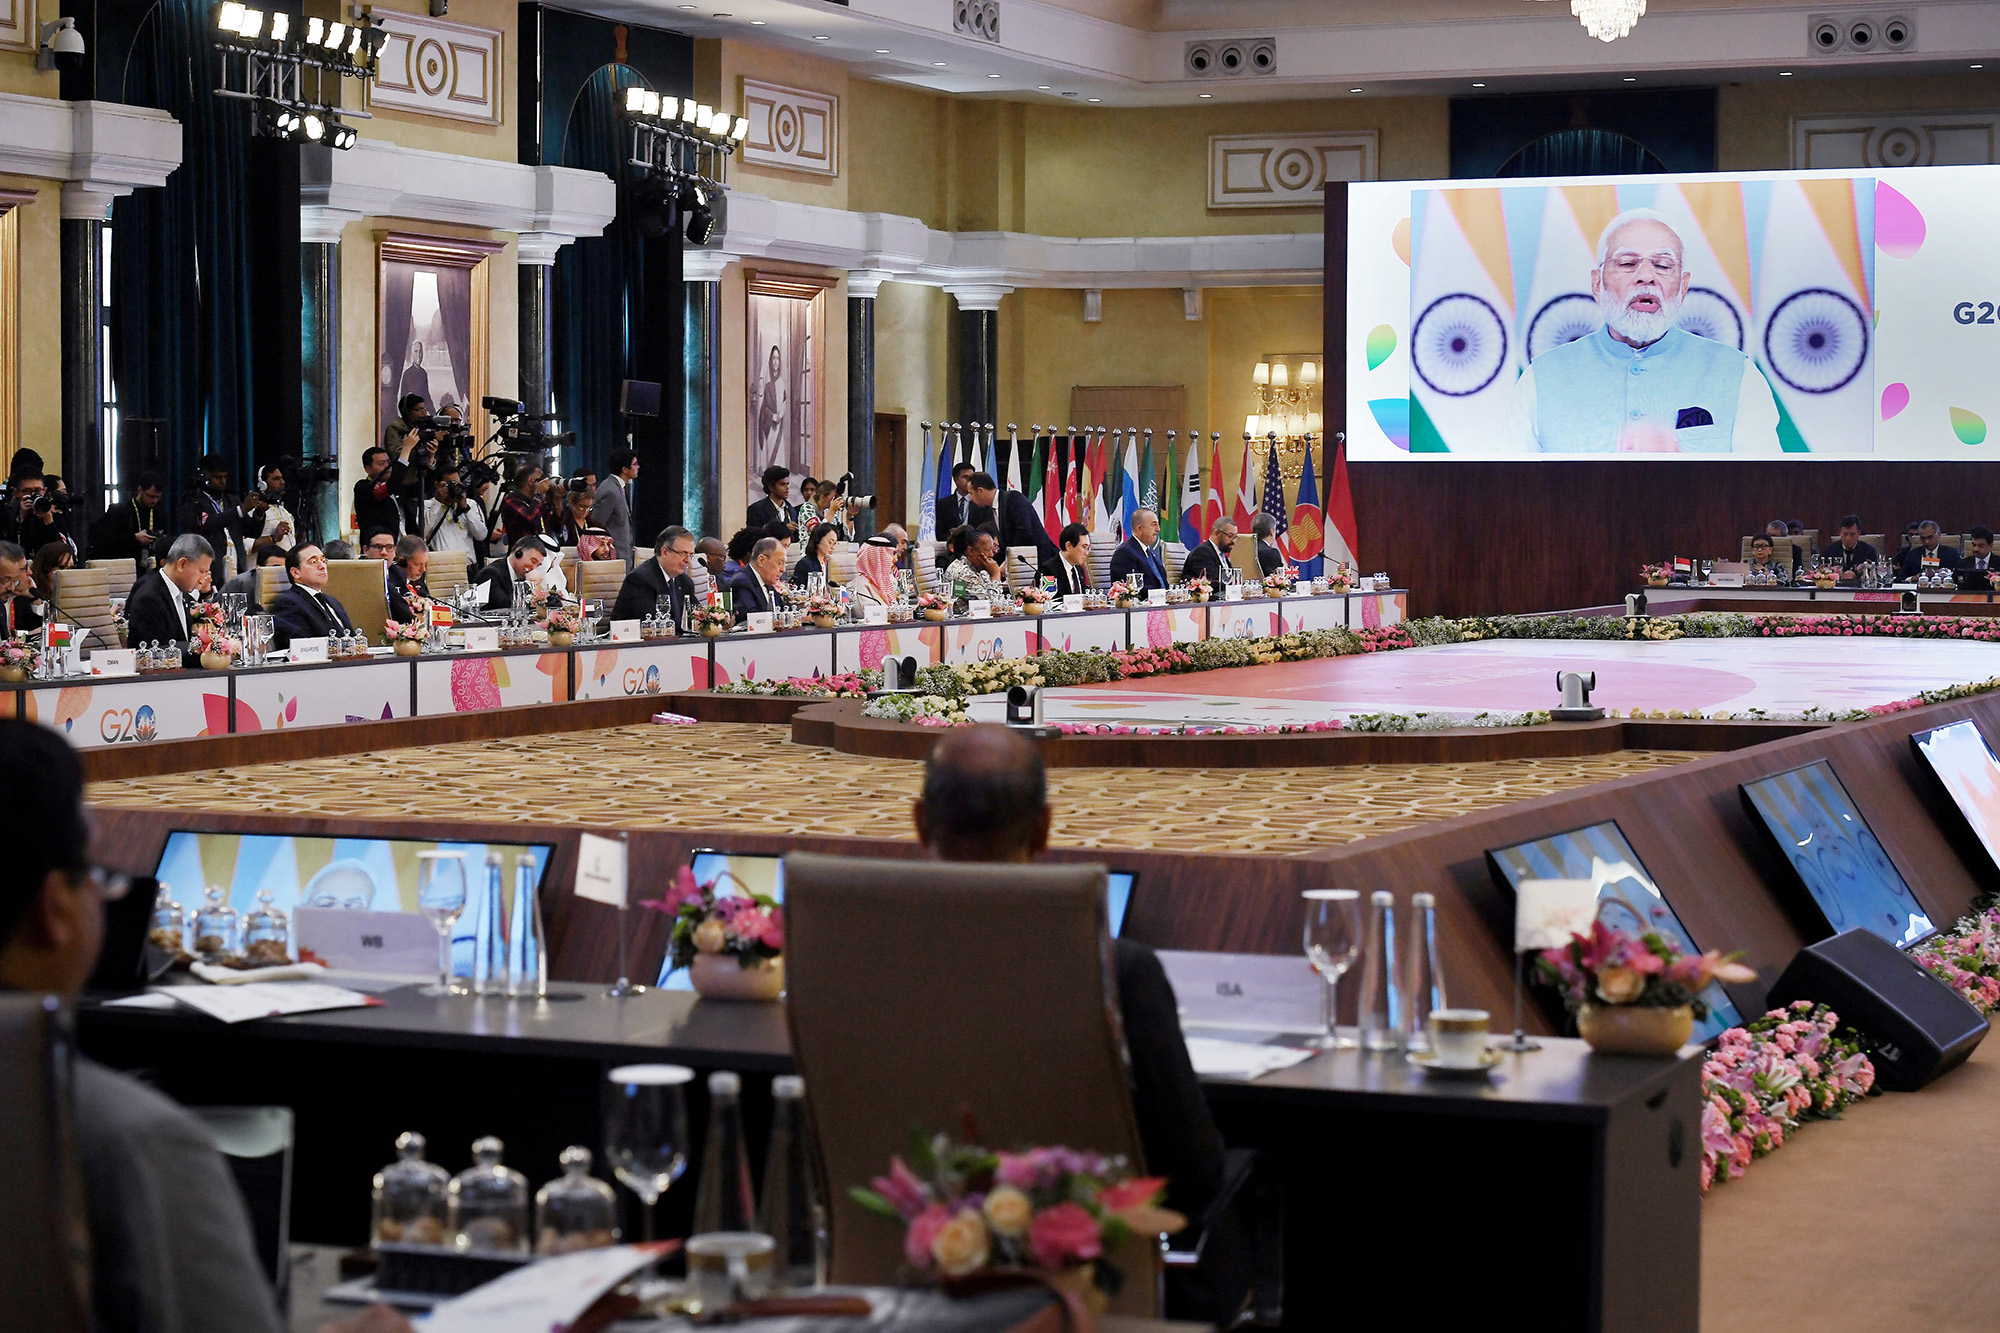 India's Prime Minister Narendra Modi addresses the G20 foreign ministers meeting, via video link, in New Delhi, India, on March 2.